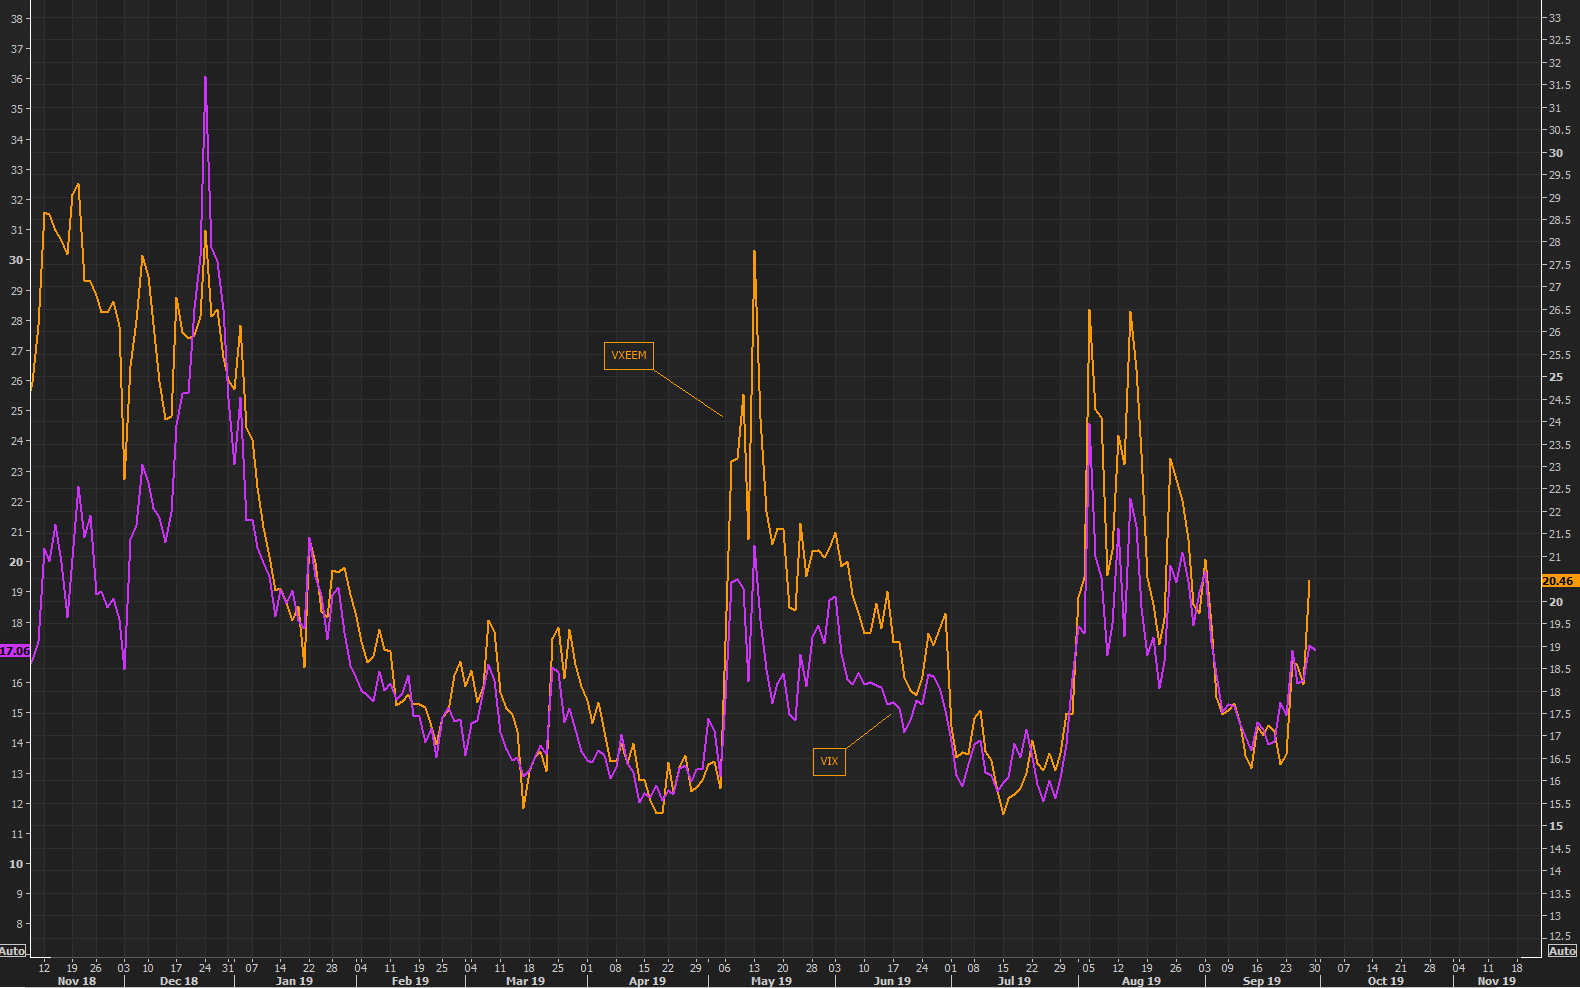 If you care about the recent Chinese capital "issues", be sure to watch the Emerging market volatility index, VXEEM